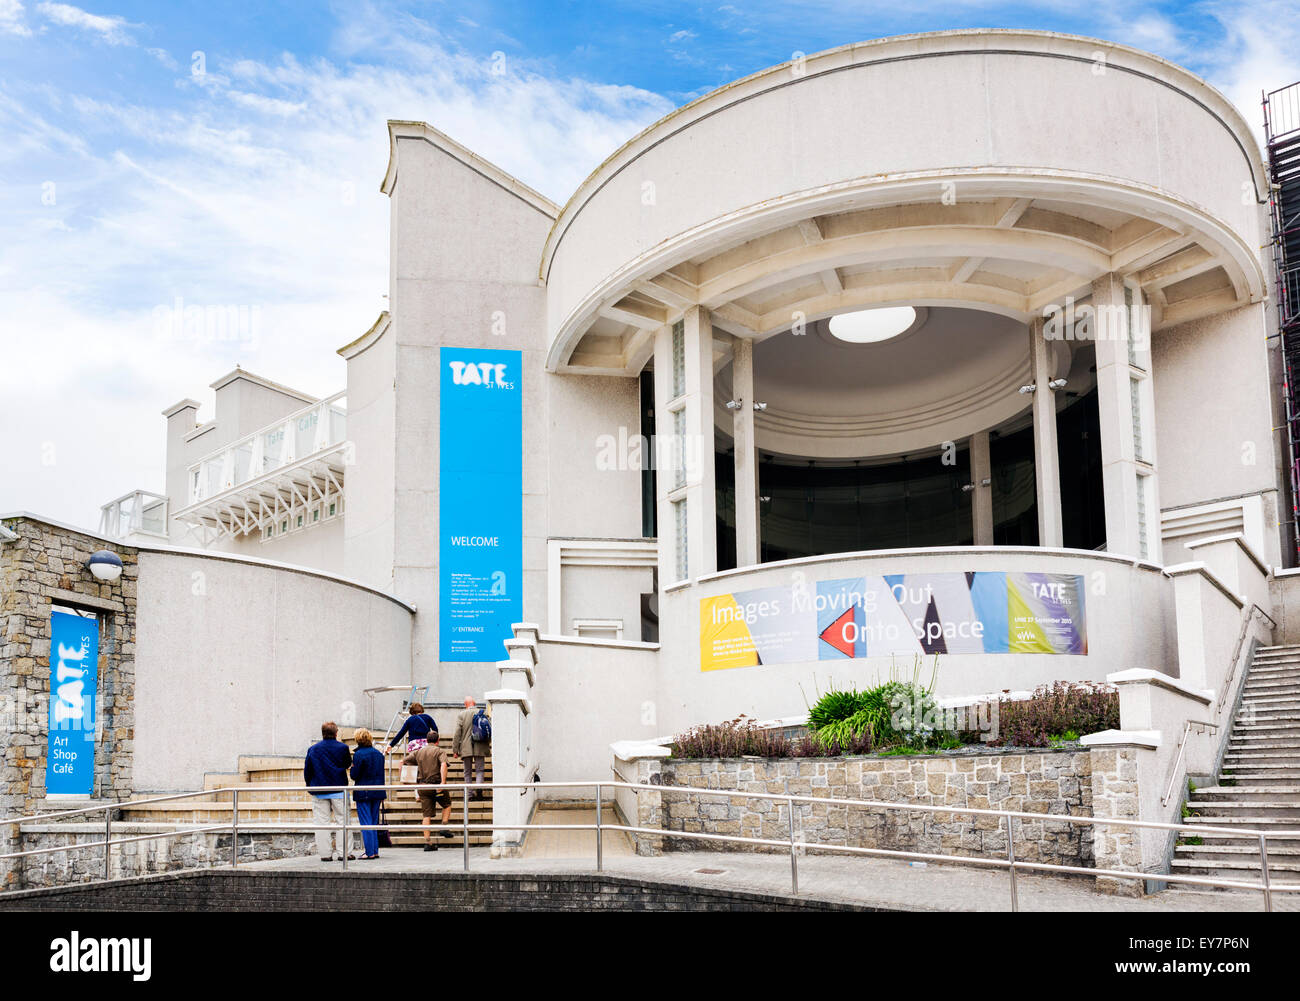 Entrance to the Tate St Ives art gallery, St Ives, Cornwall, England, UK Stock Photo